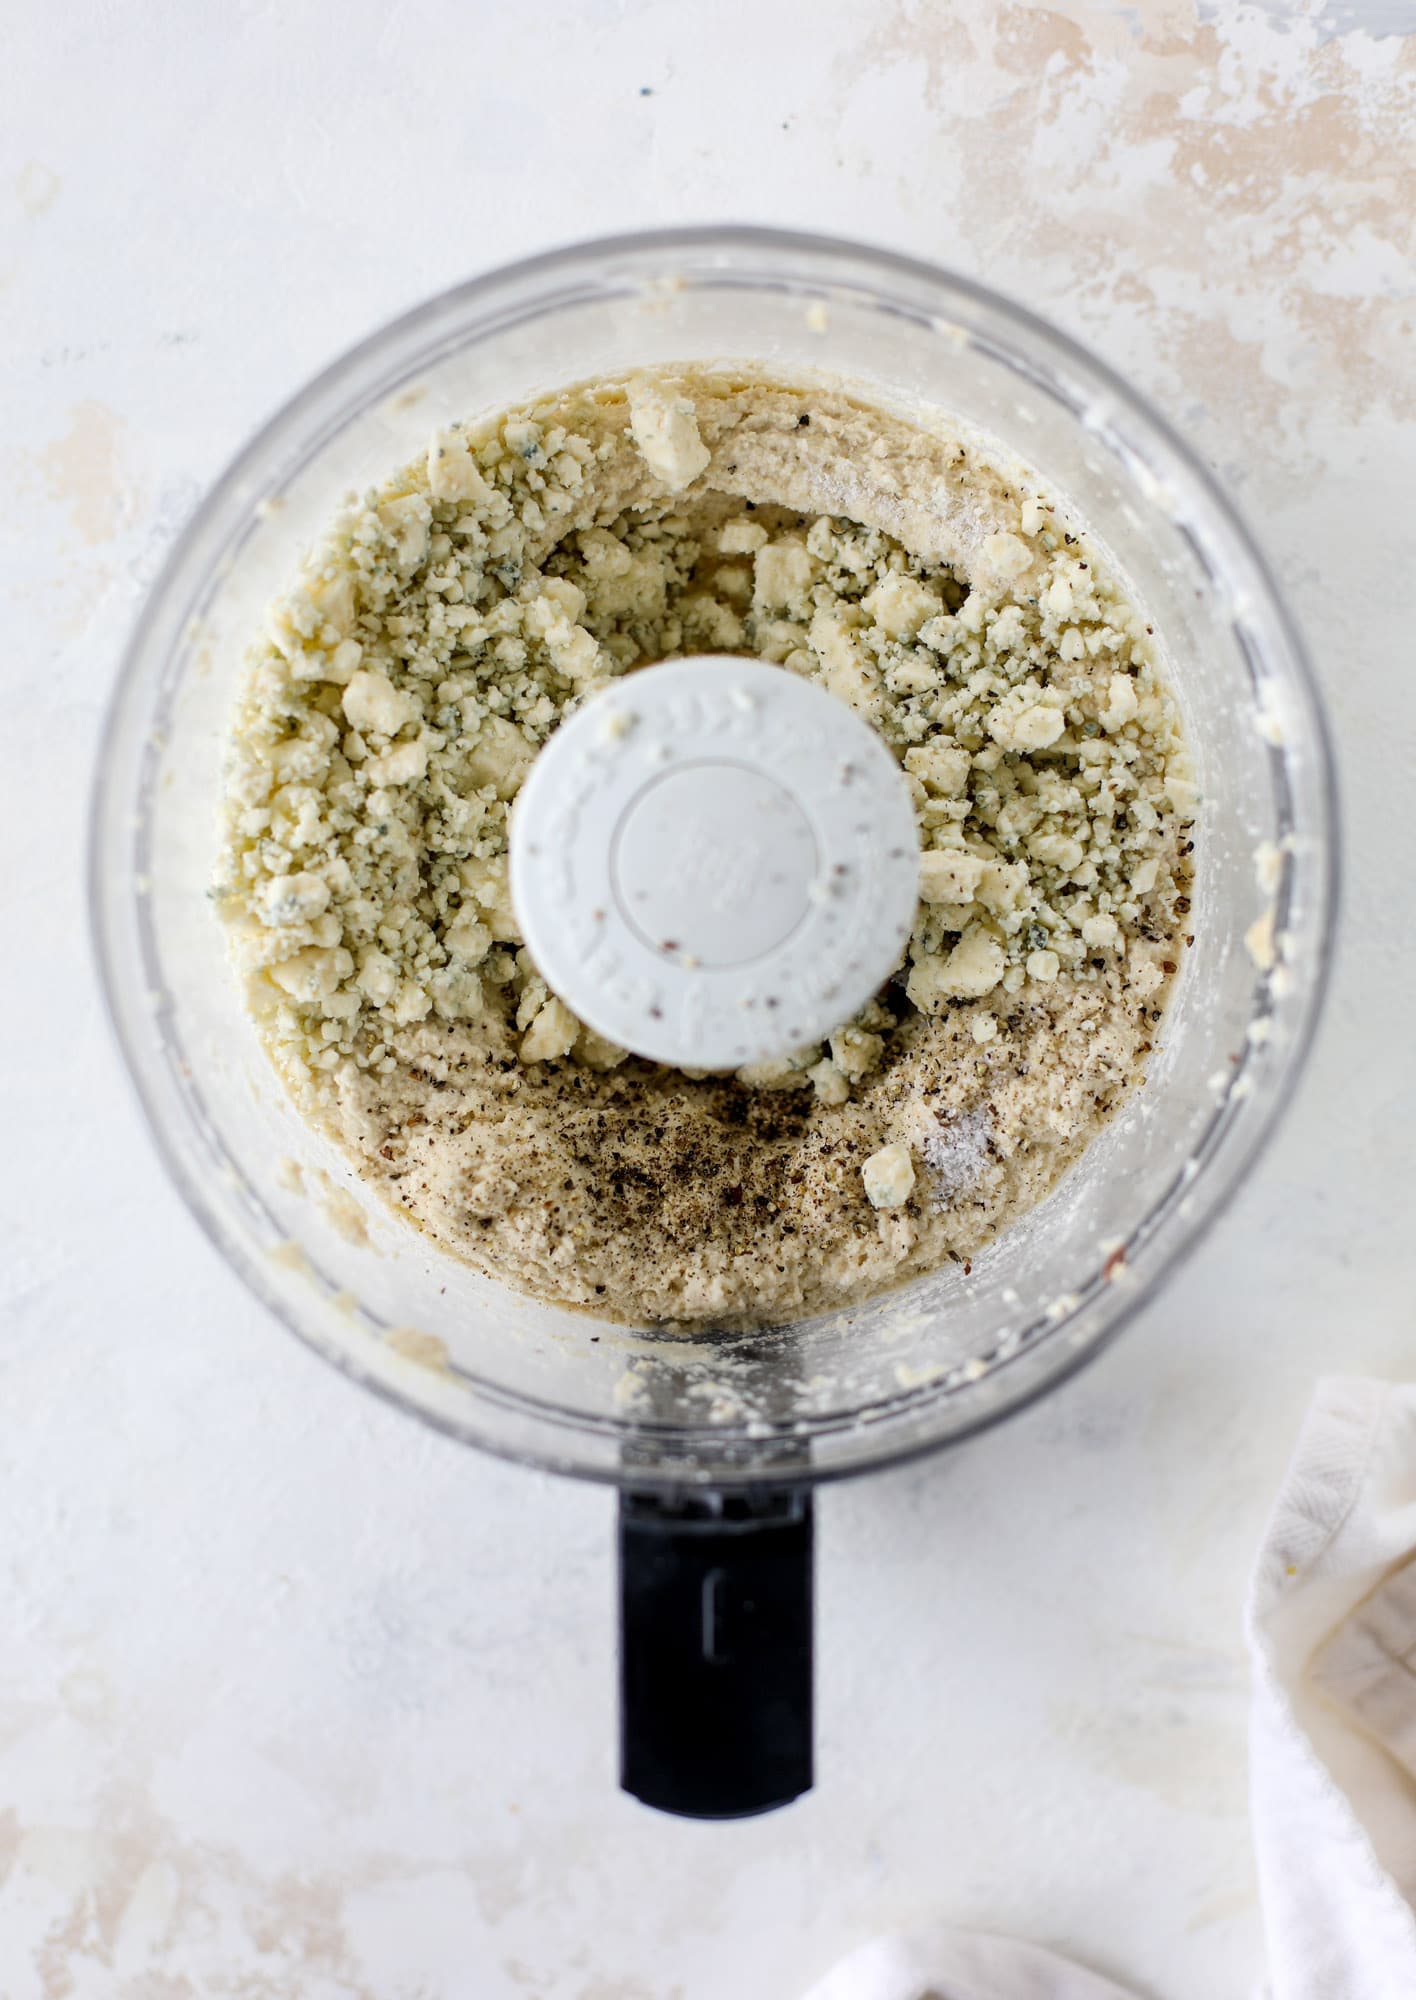 cashes and blue cheese in the food processor for dip